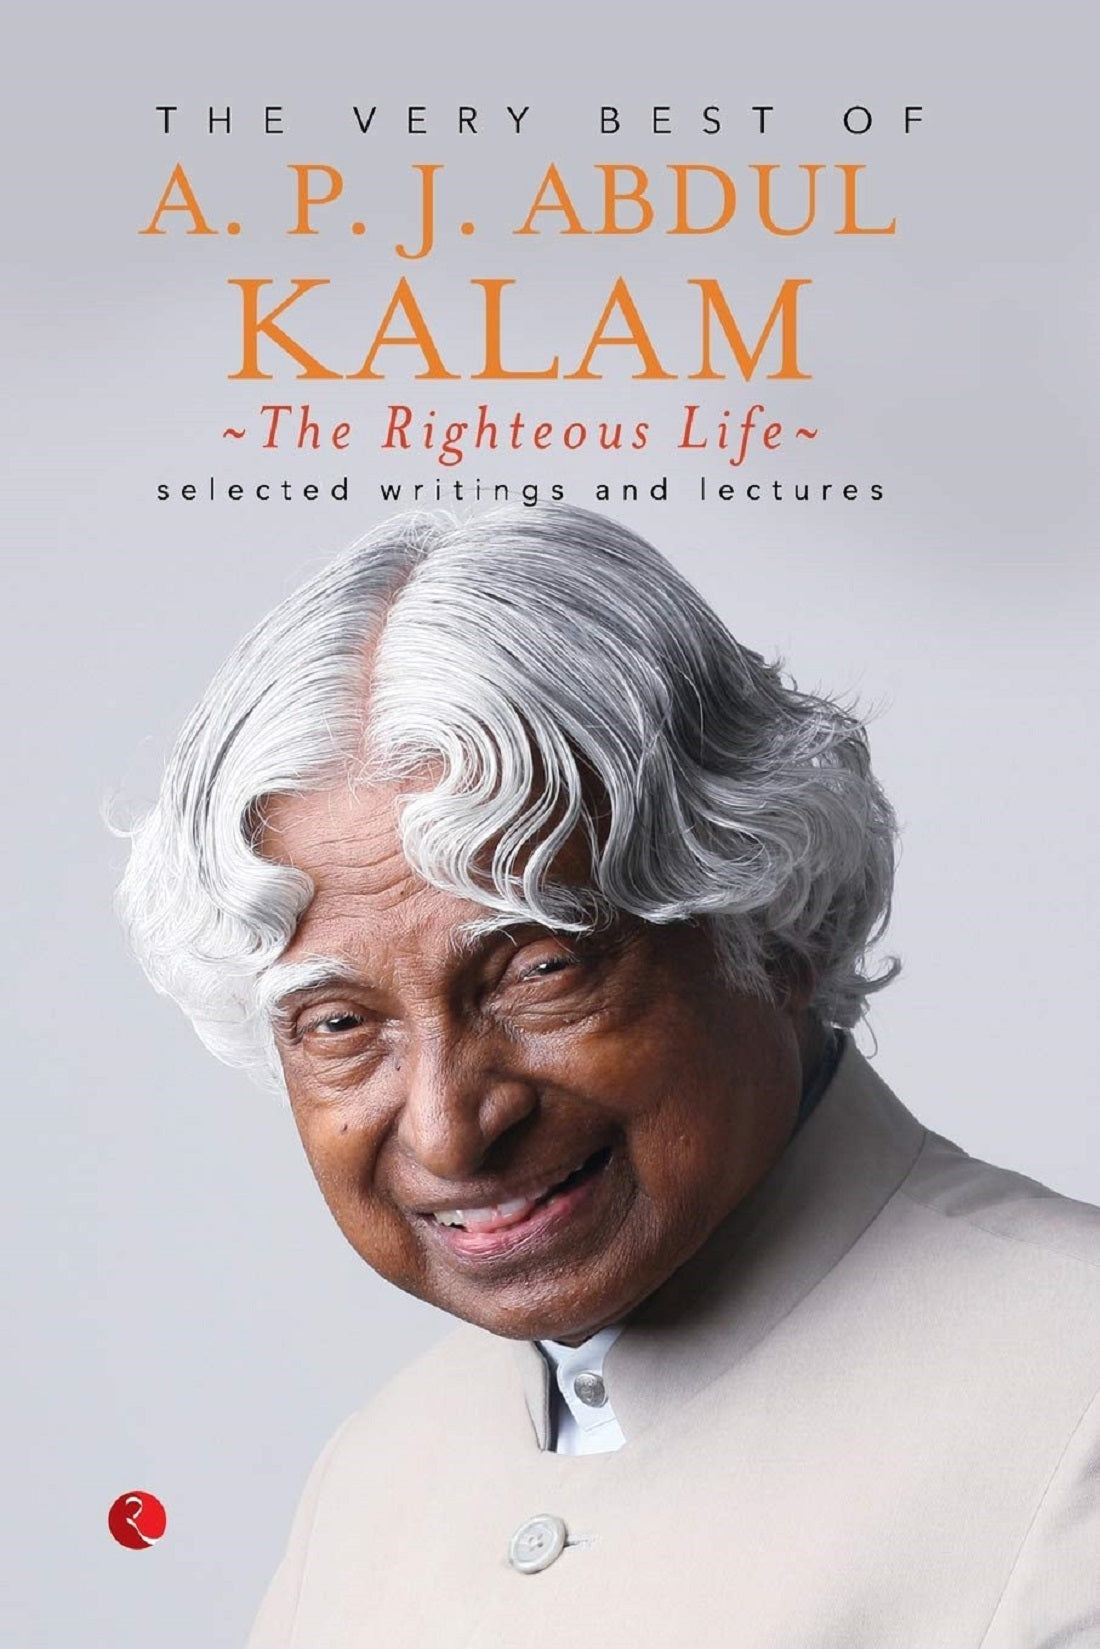 THE VERY BEST OF A P J ABDUL KALAM : THE RIGHTEOUS OF LIFE